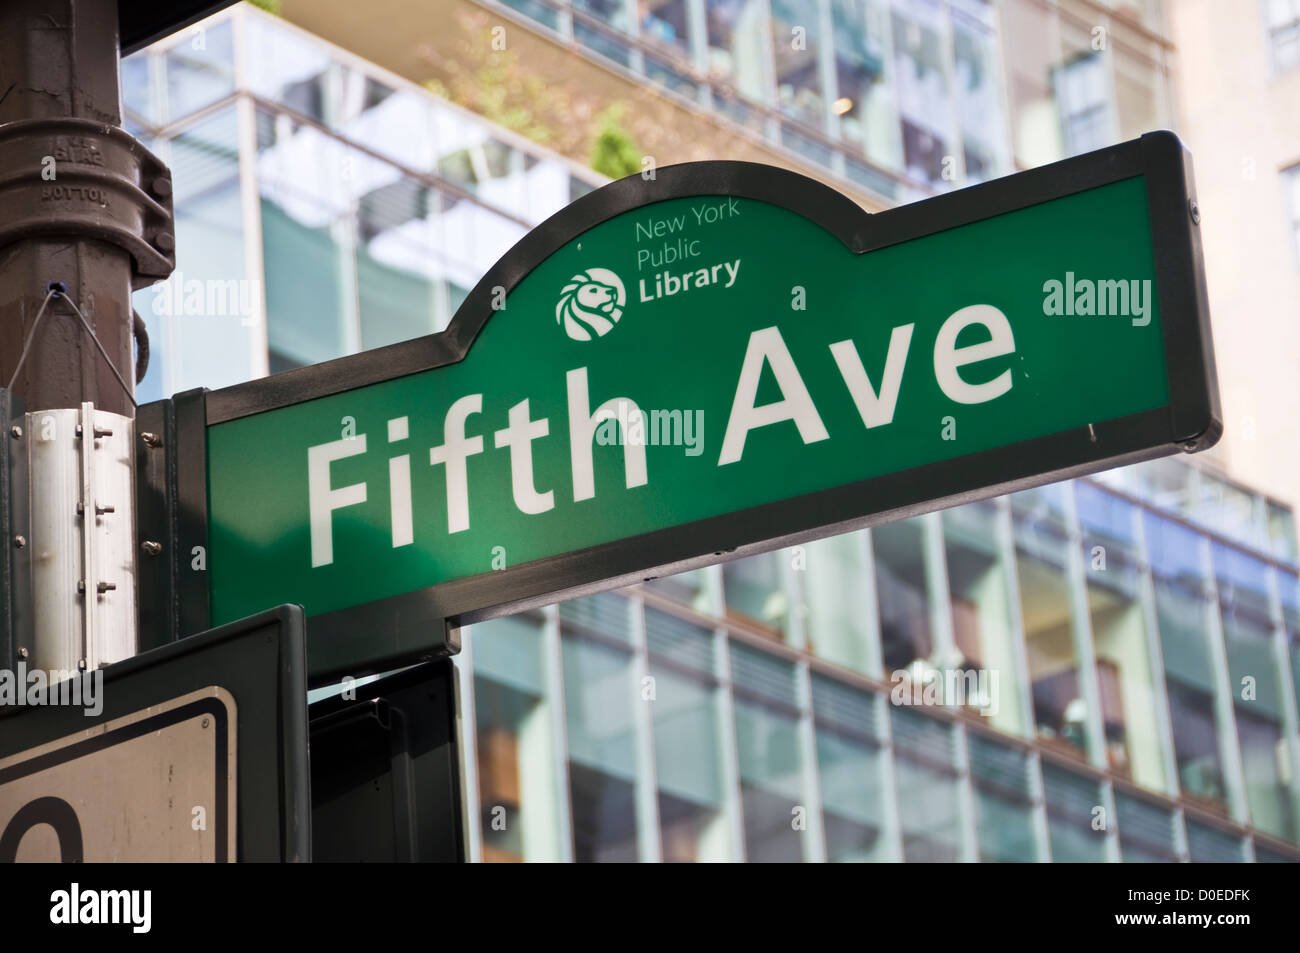 Fifth avenue and New York Public Library green sign - Manhattan, New York City, USA Stock Photo